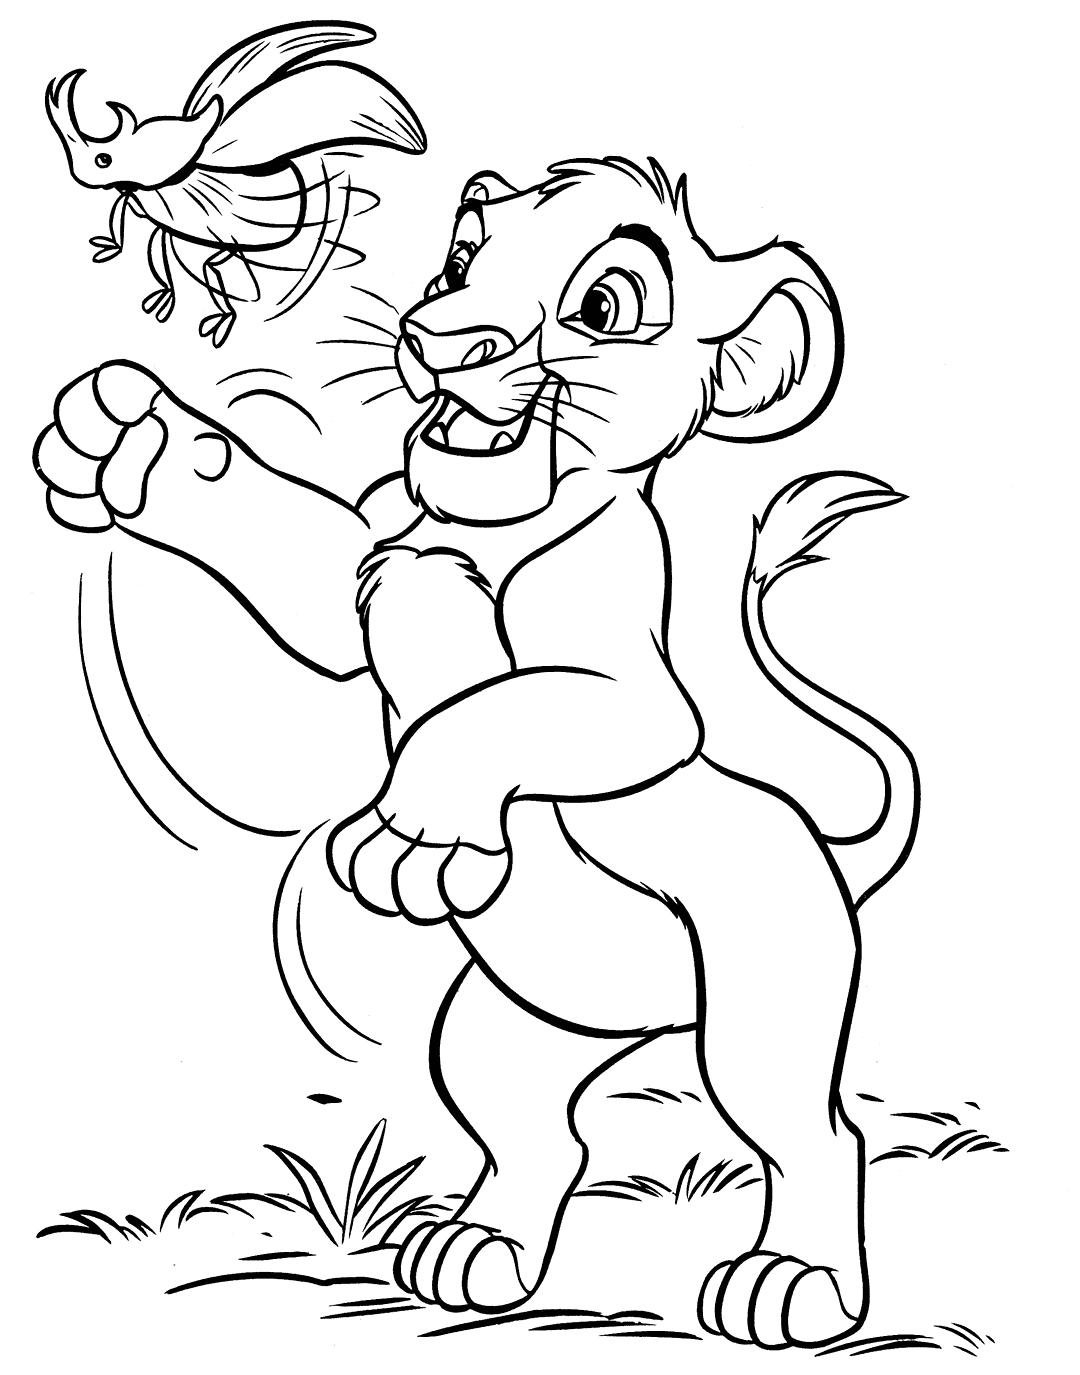 Young Simba Catching Bugs Coloring Page